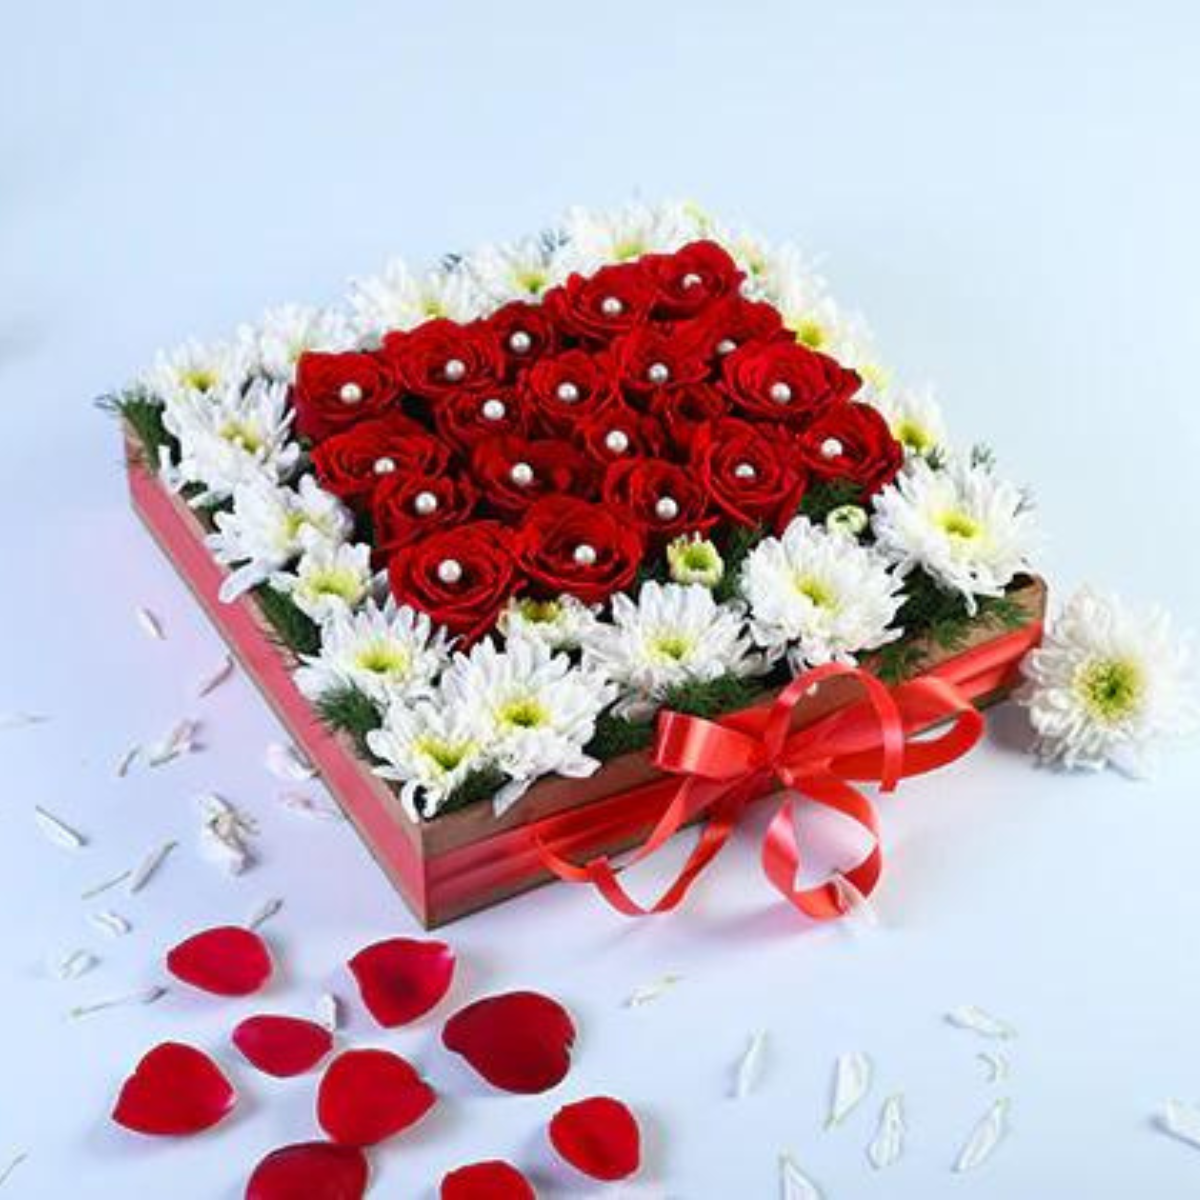 Online midnight cake and flowers delivery in Hyderabad surprise